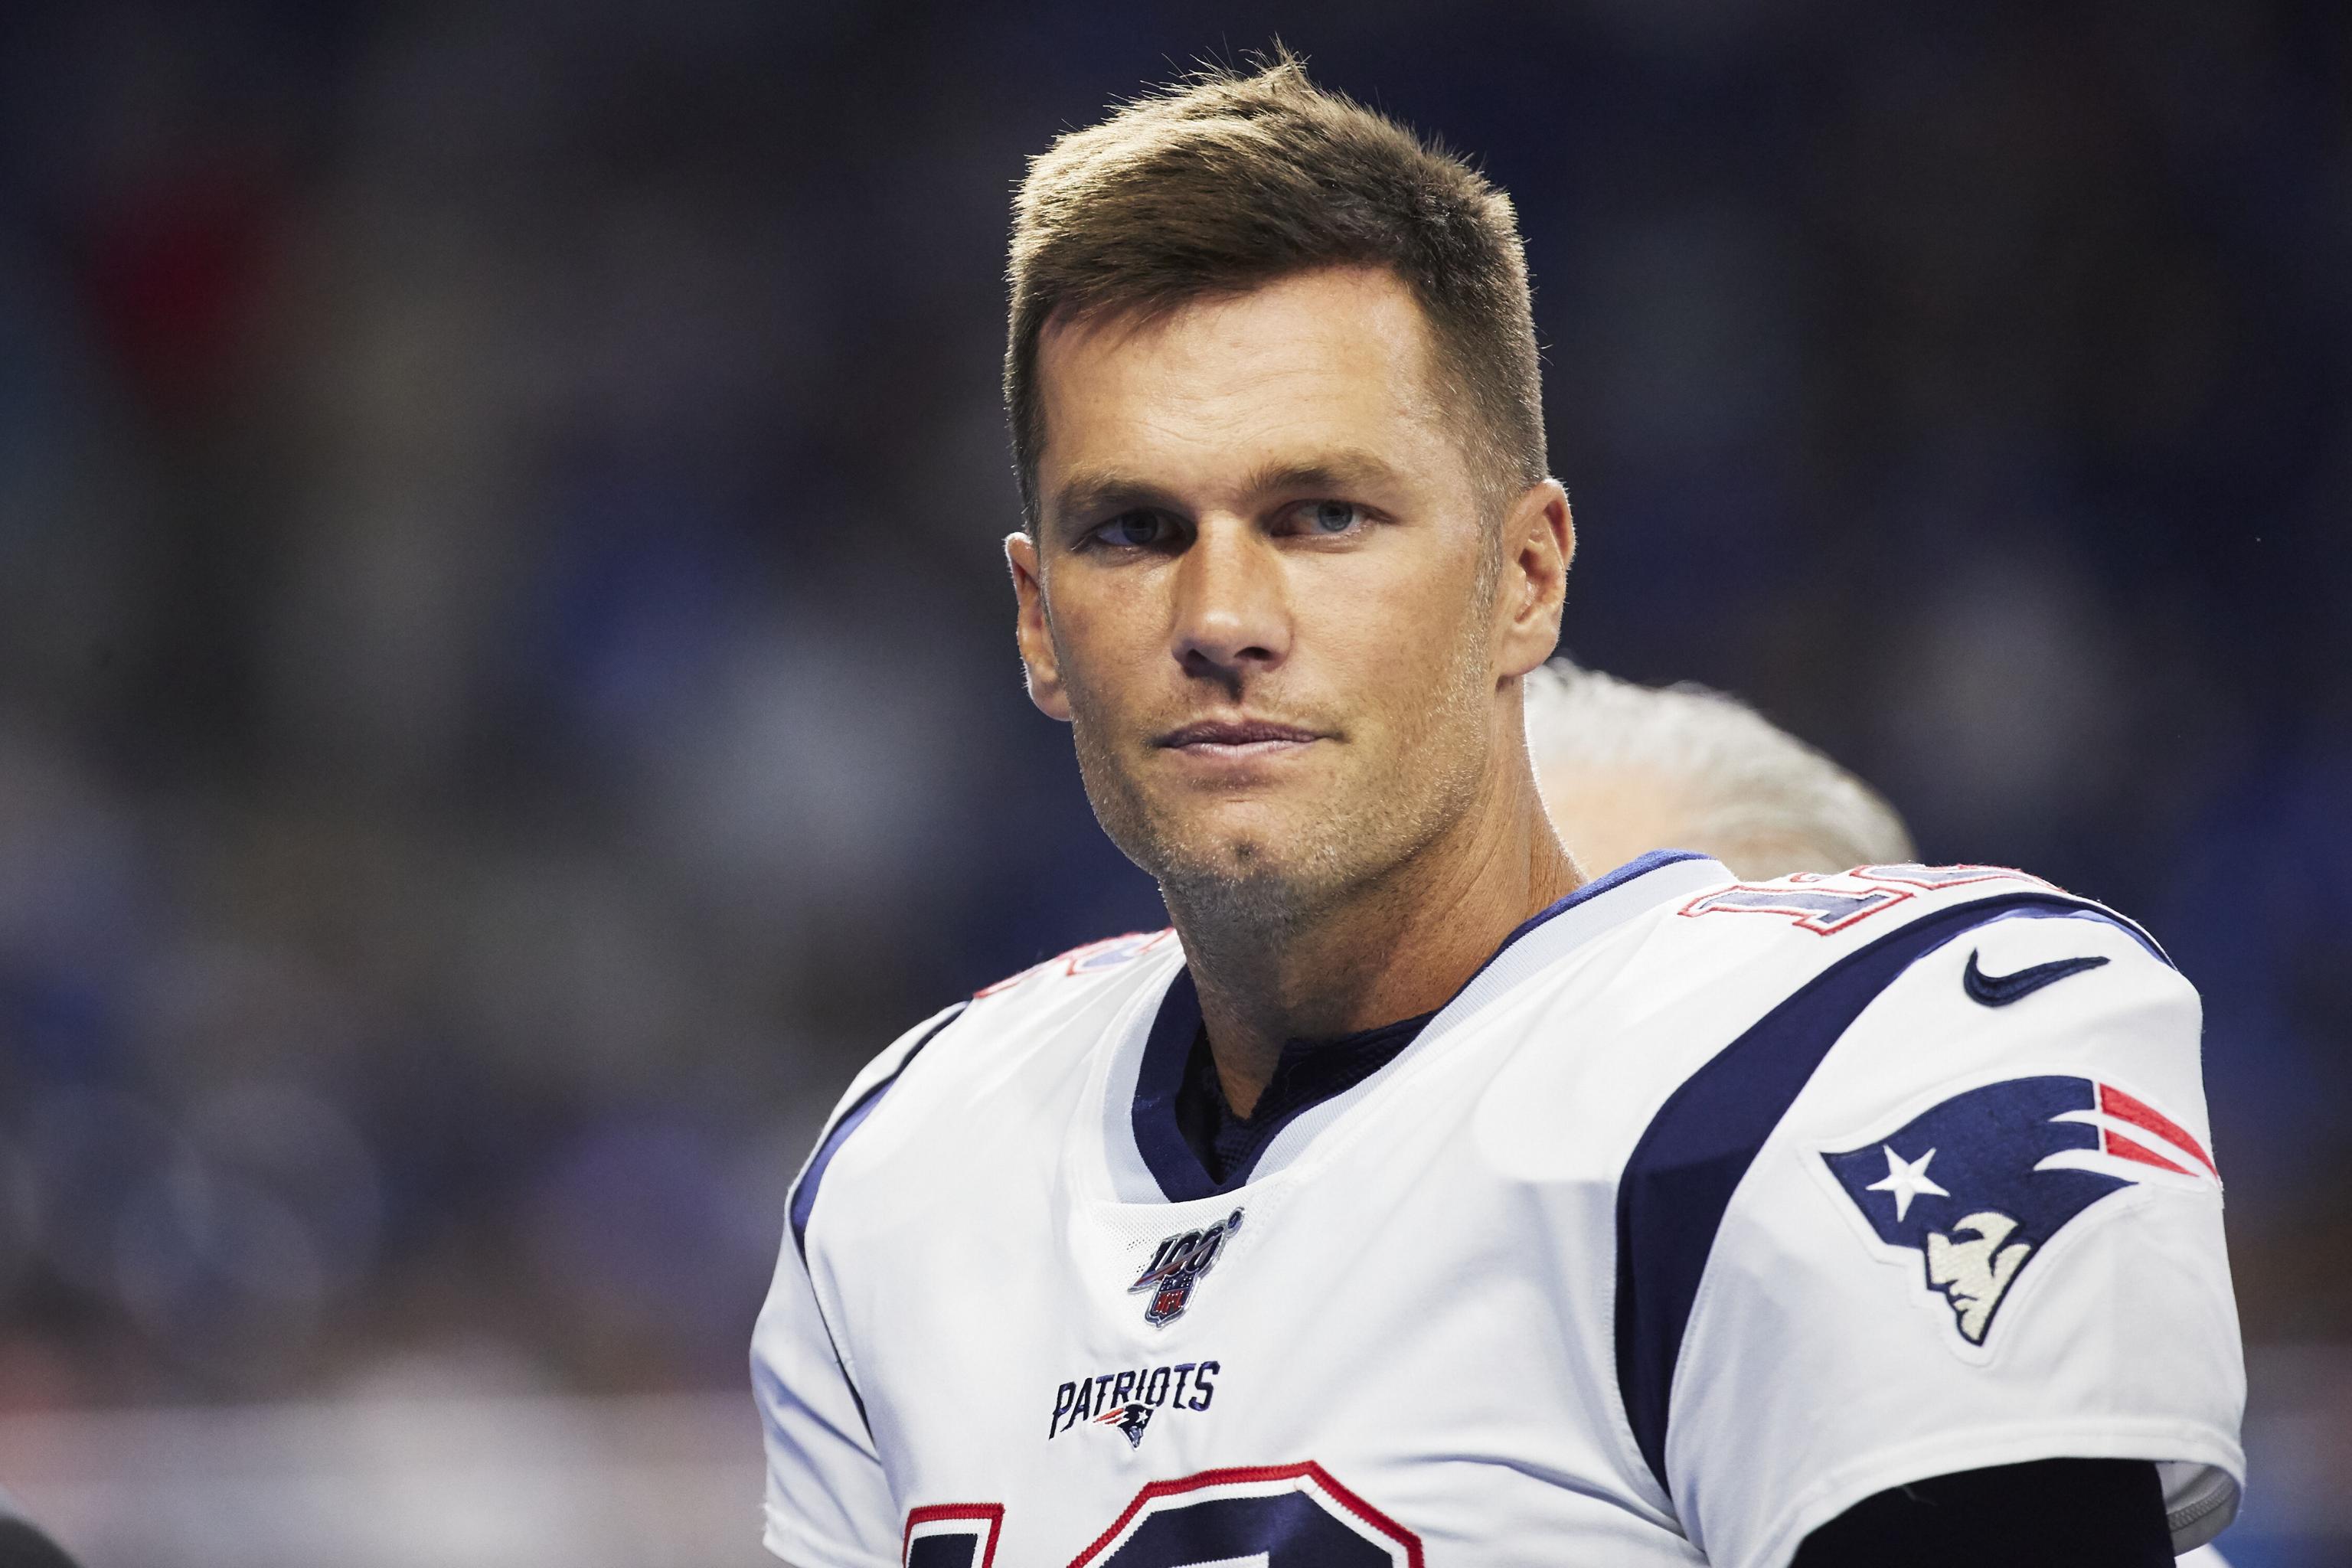 40 unbelievable stats about 40-year-old Tom Brady